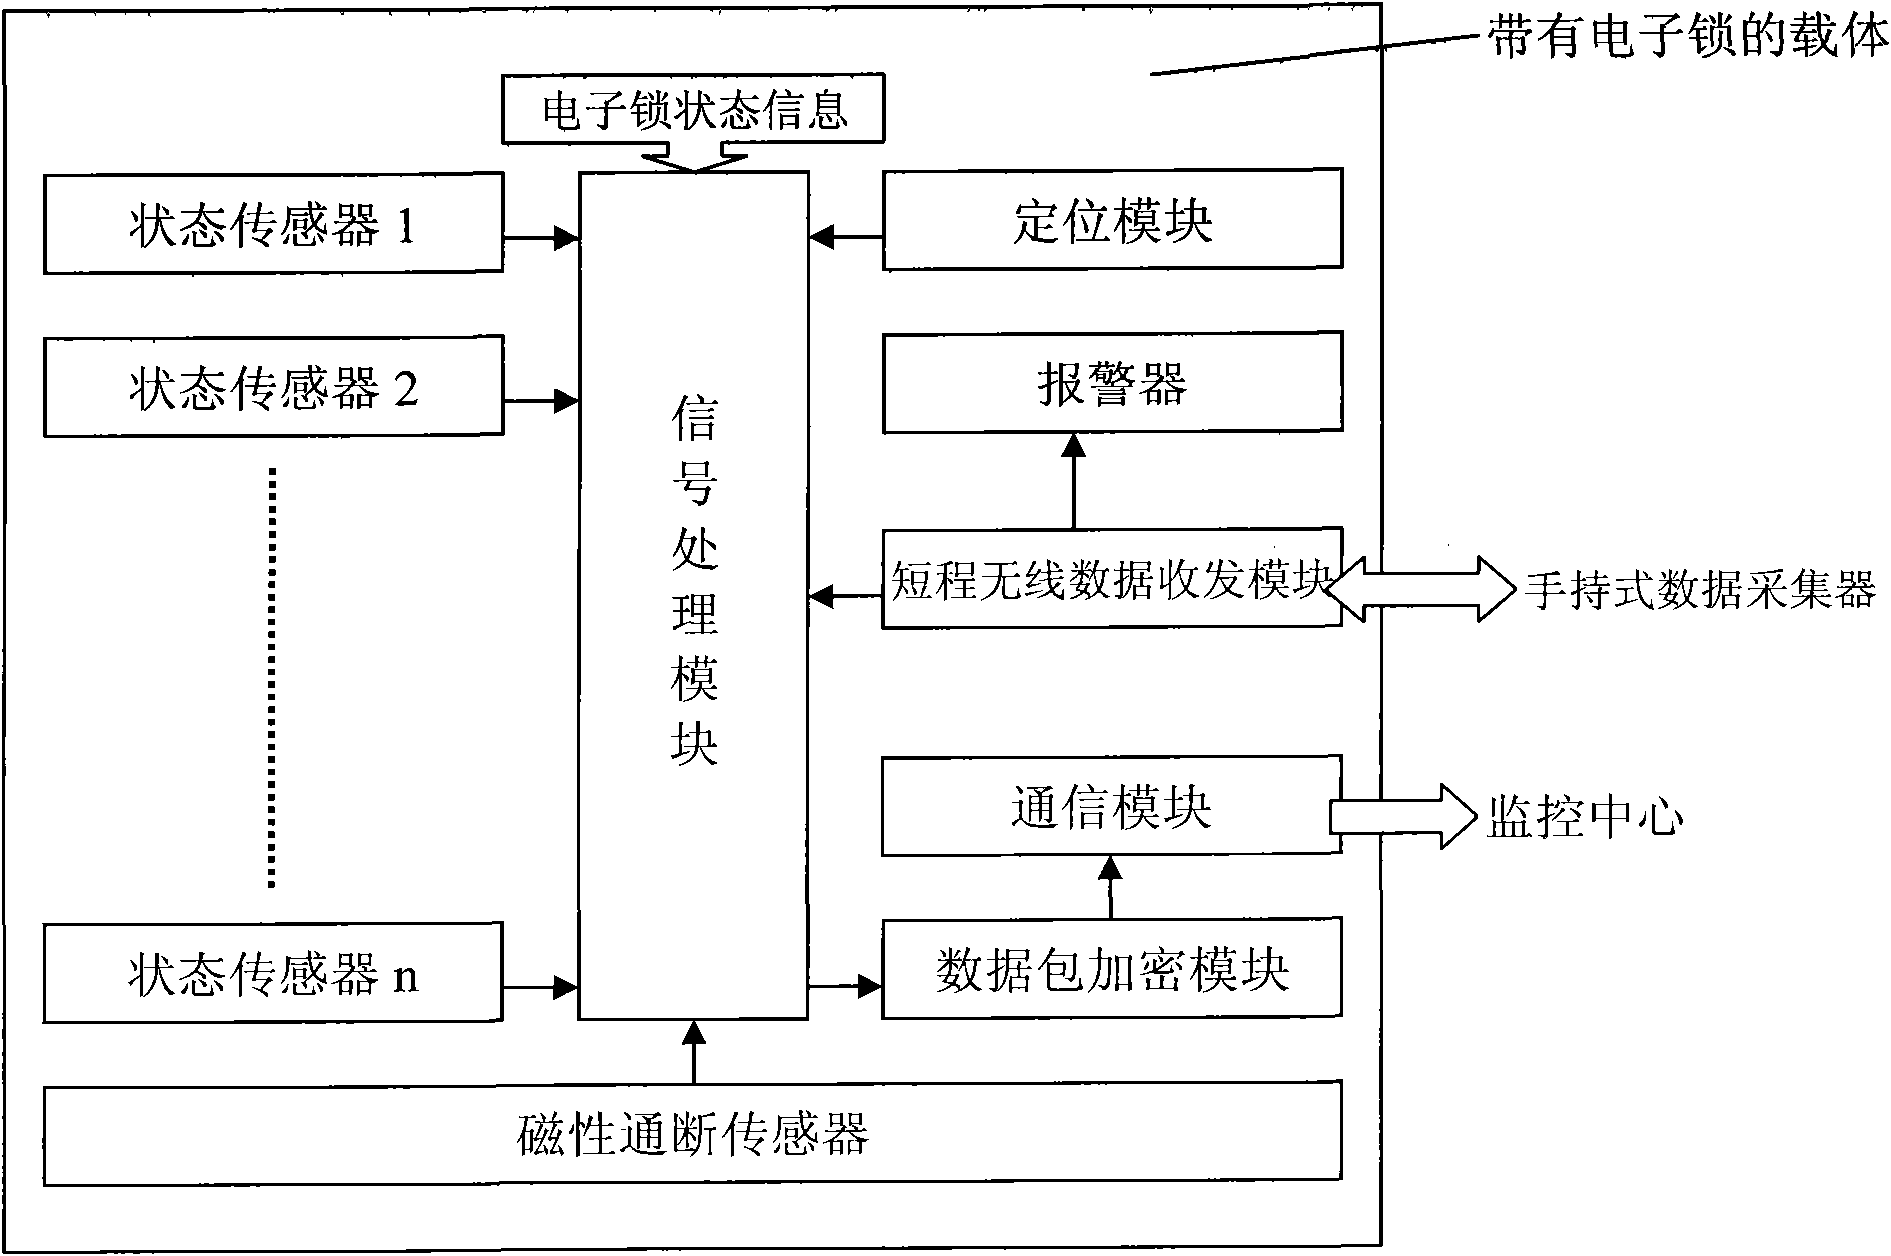 Real-time monitoring device for carrier state based on radio communication and sensor technology